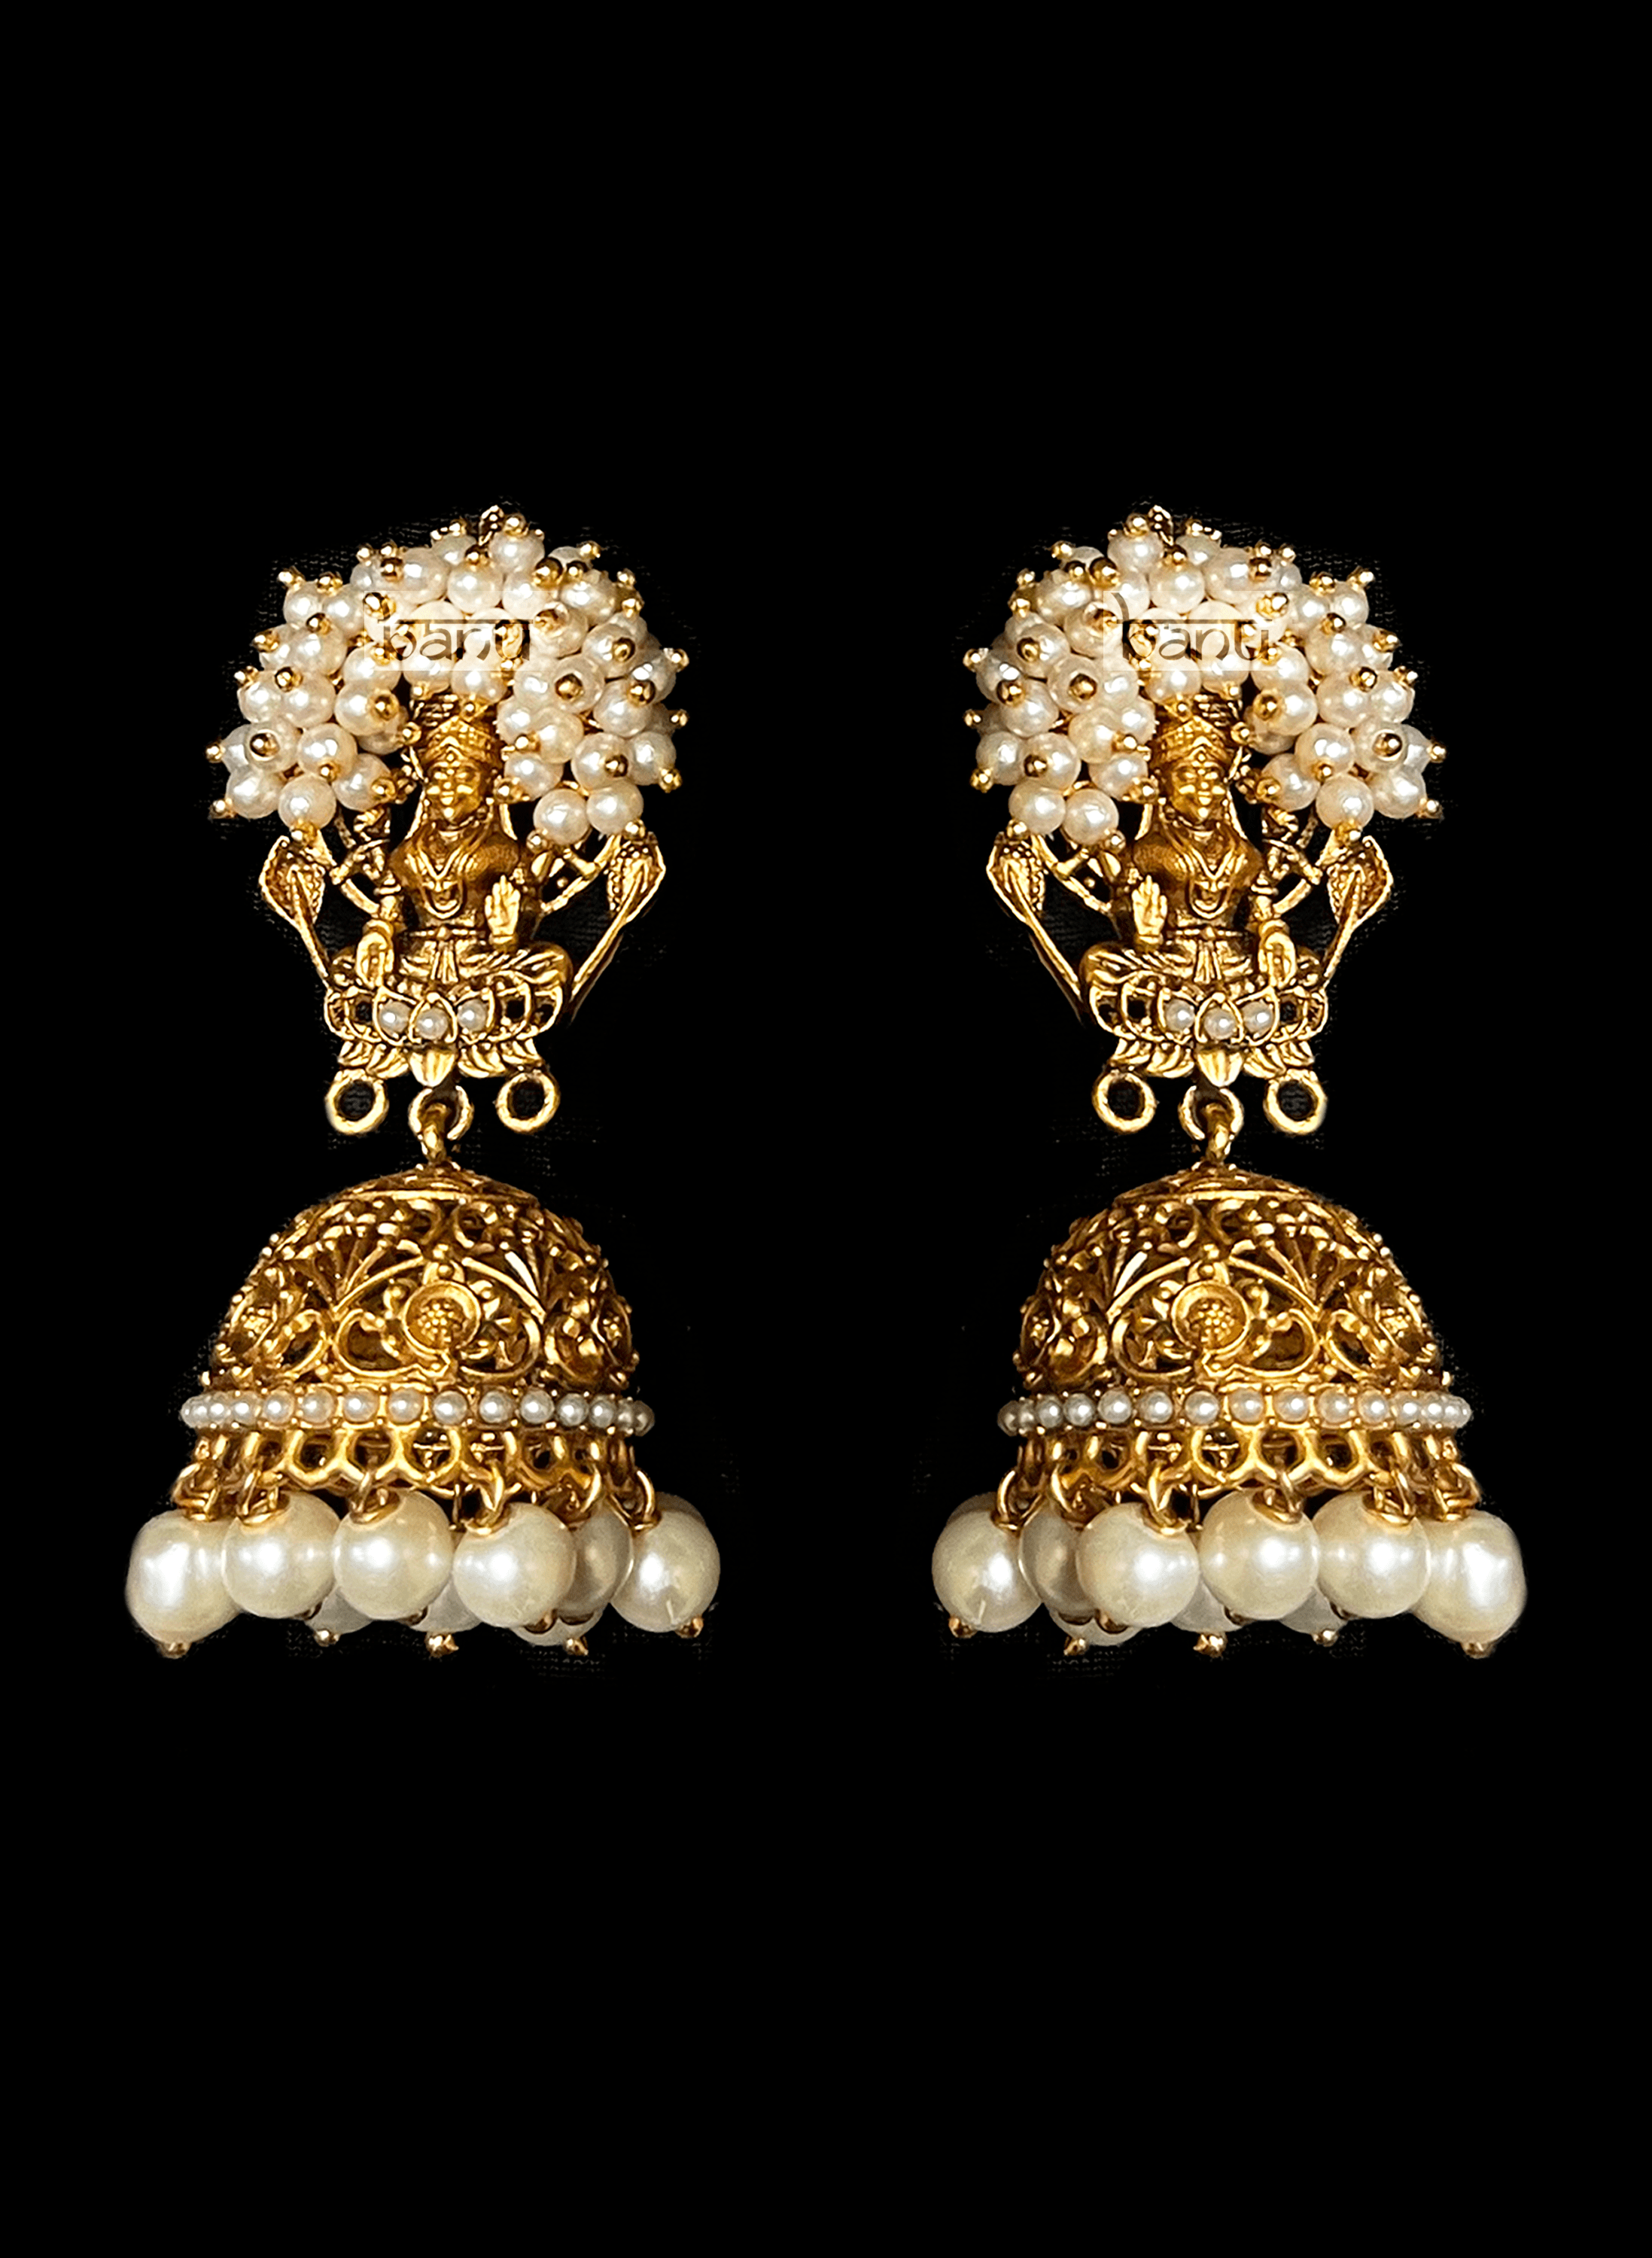 Mugdha - South Indian Temple Jewelry w/ Cluster Pearls & Goddess Motif work